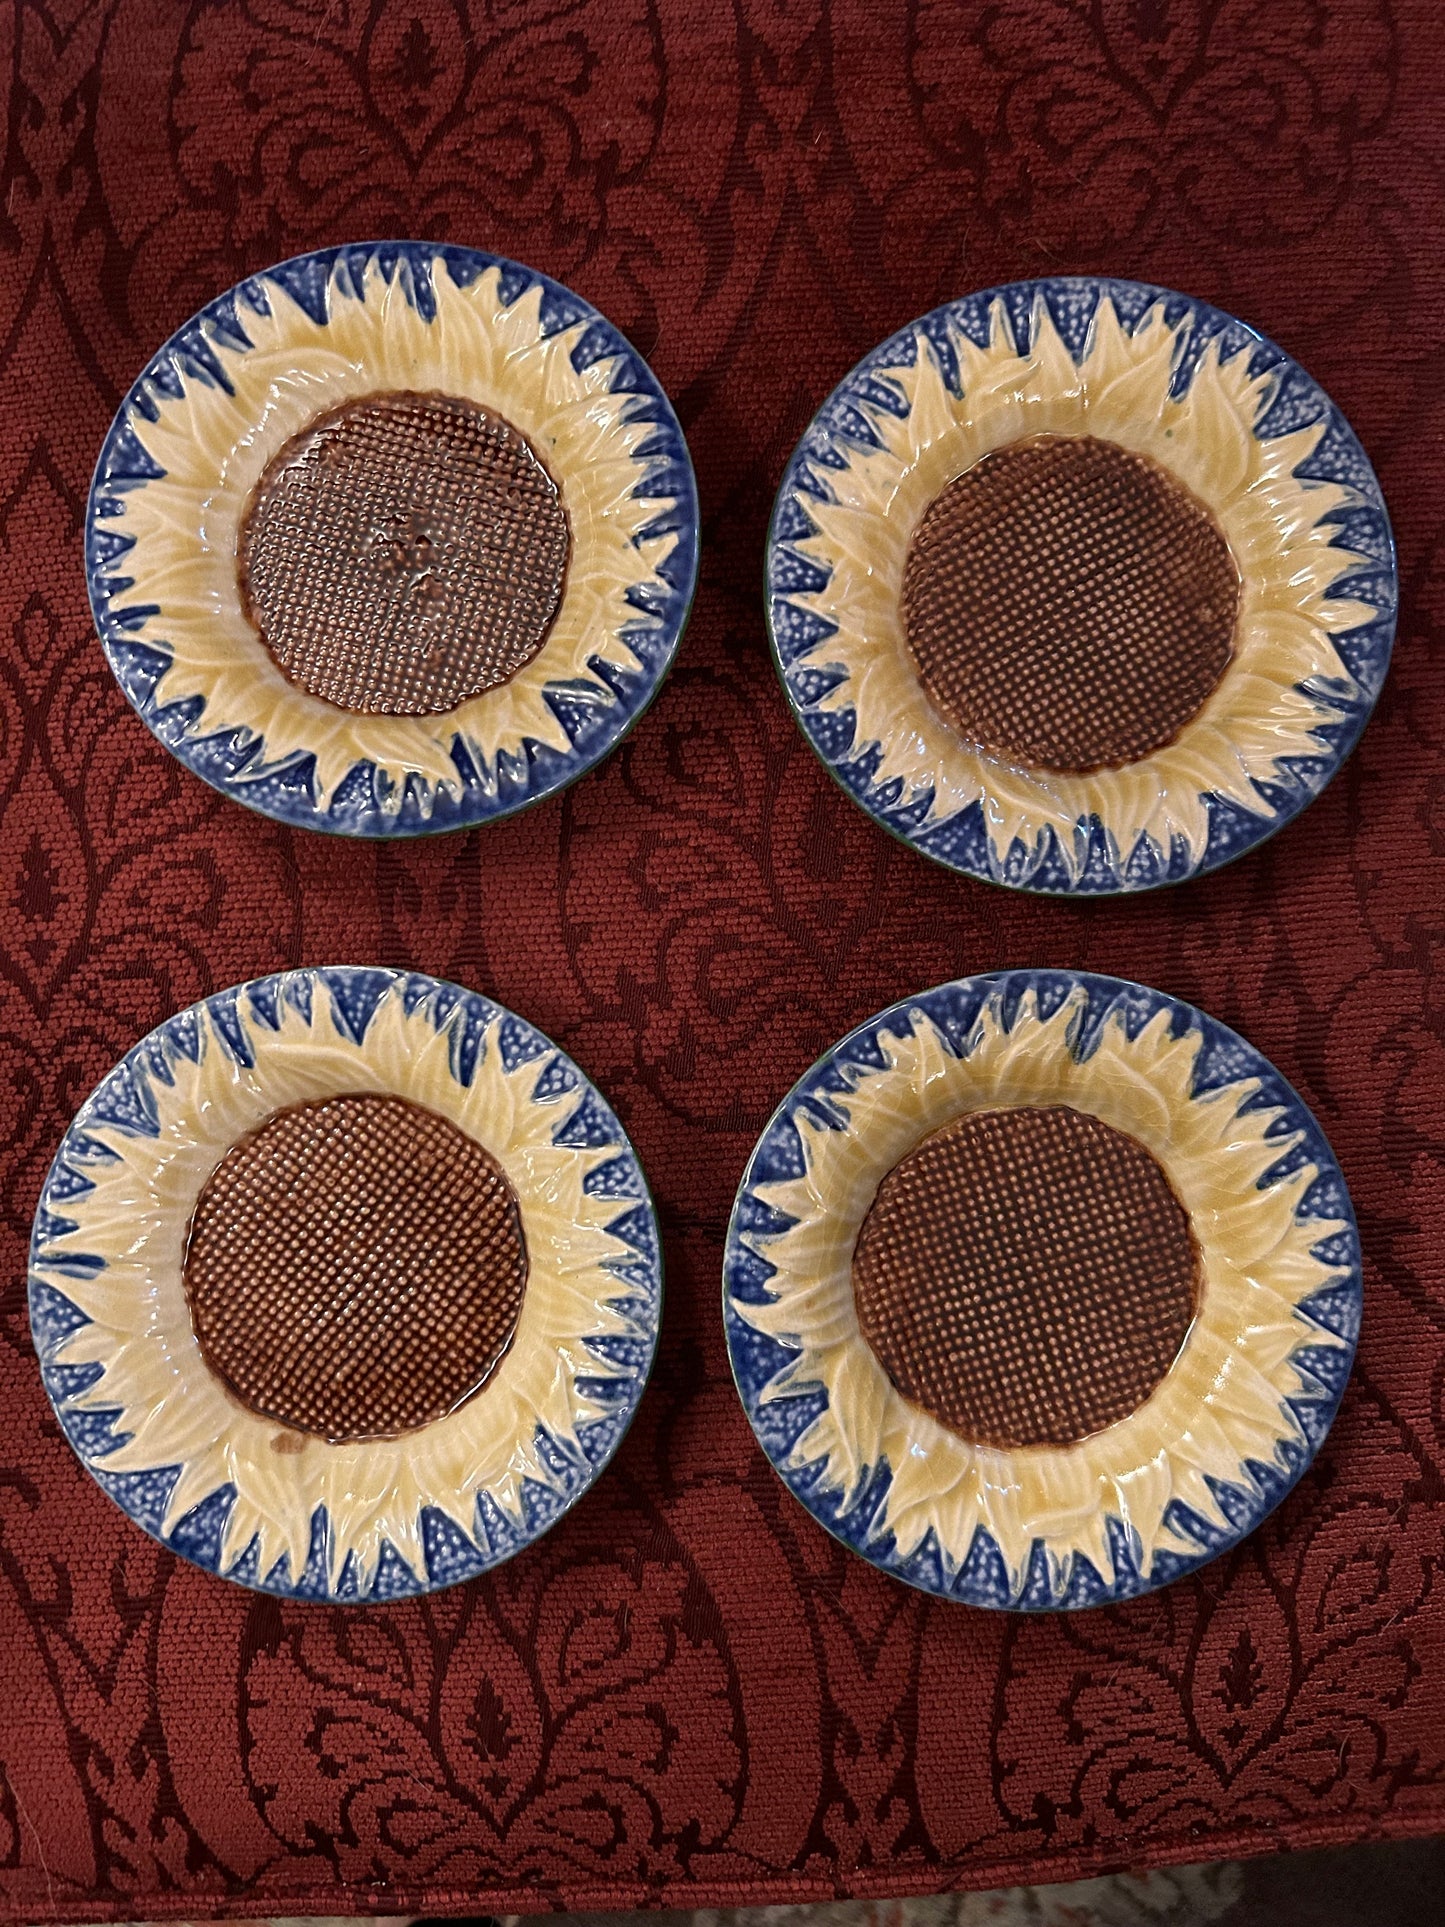 Metropolitan Museum Reproduction of Etruscan Sunflower Dishes 5” 60/2